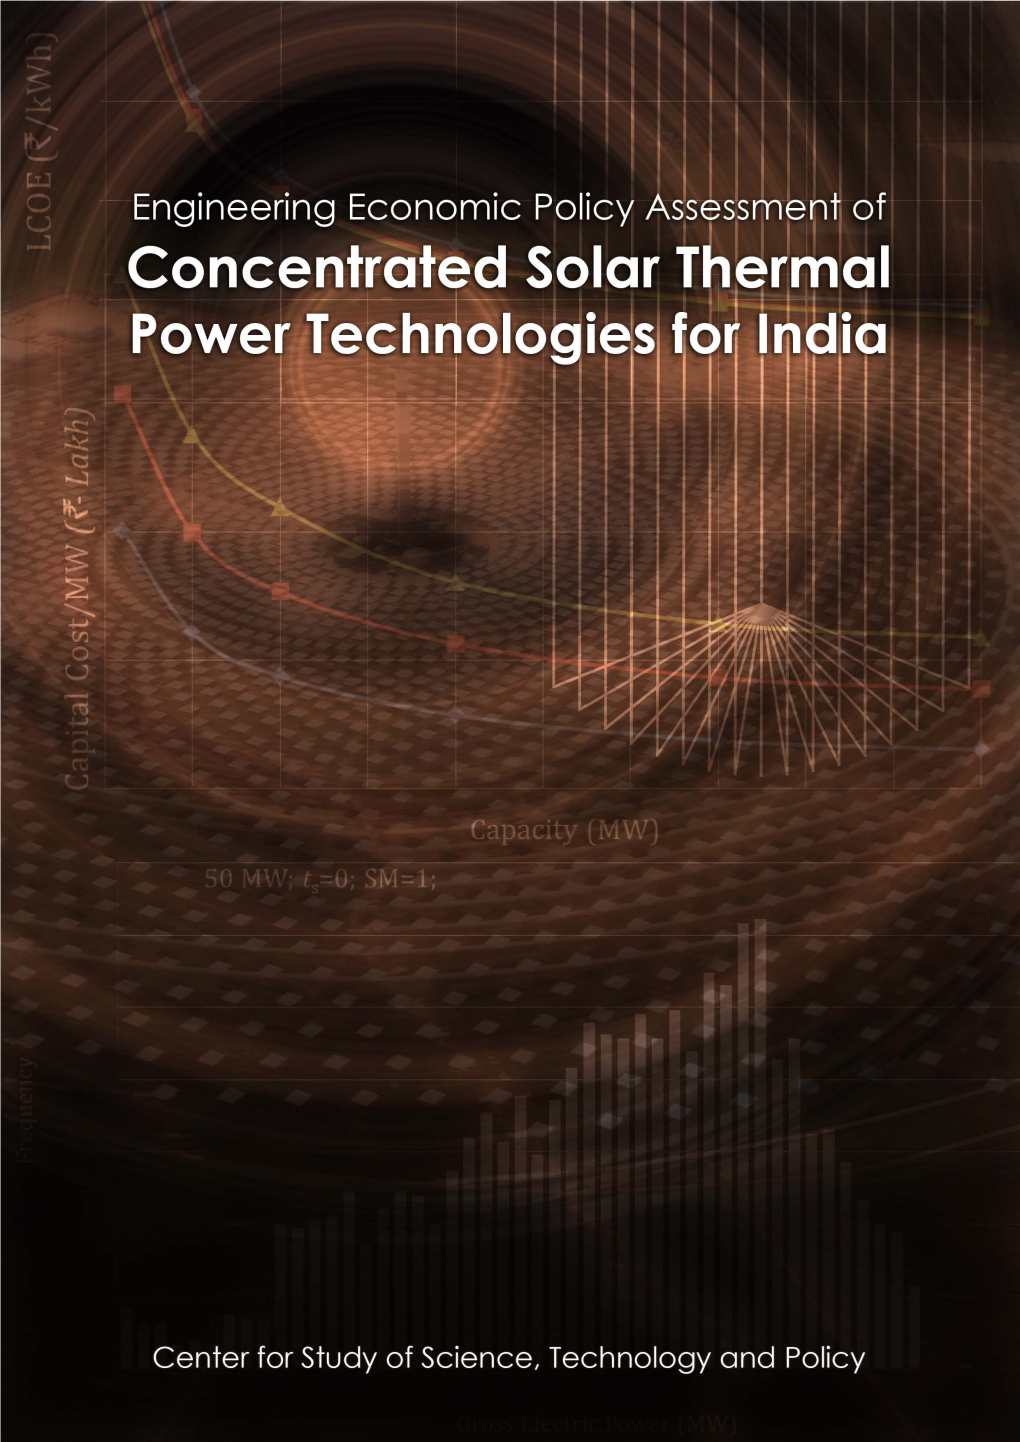 Engineering Economic Policy Assessment of Concentrating Solar Thermal Power Technologies in India